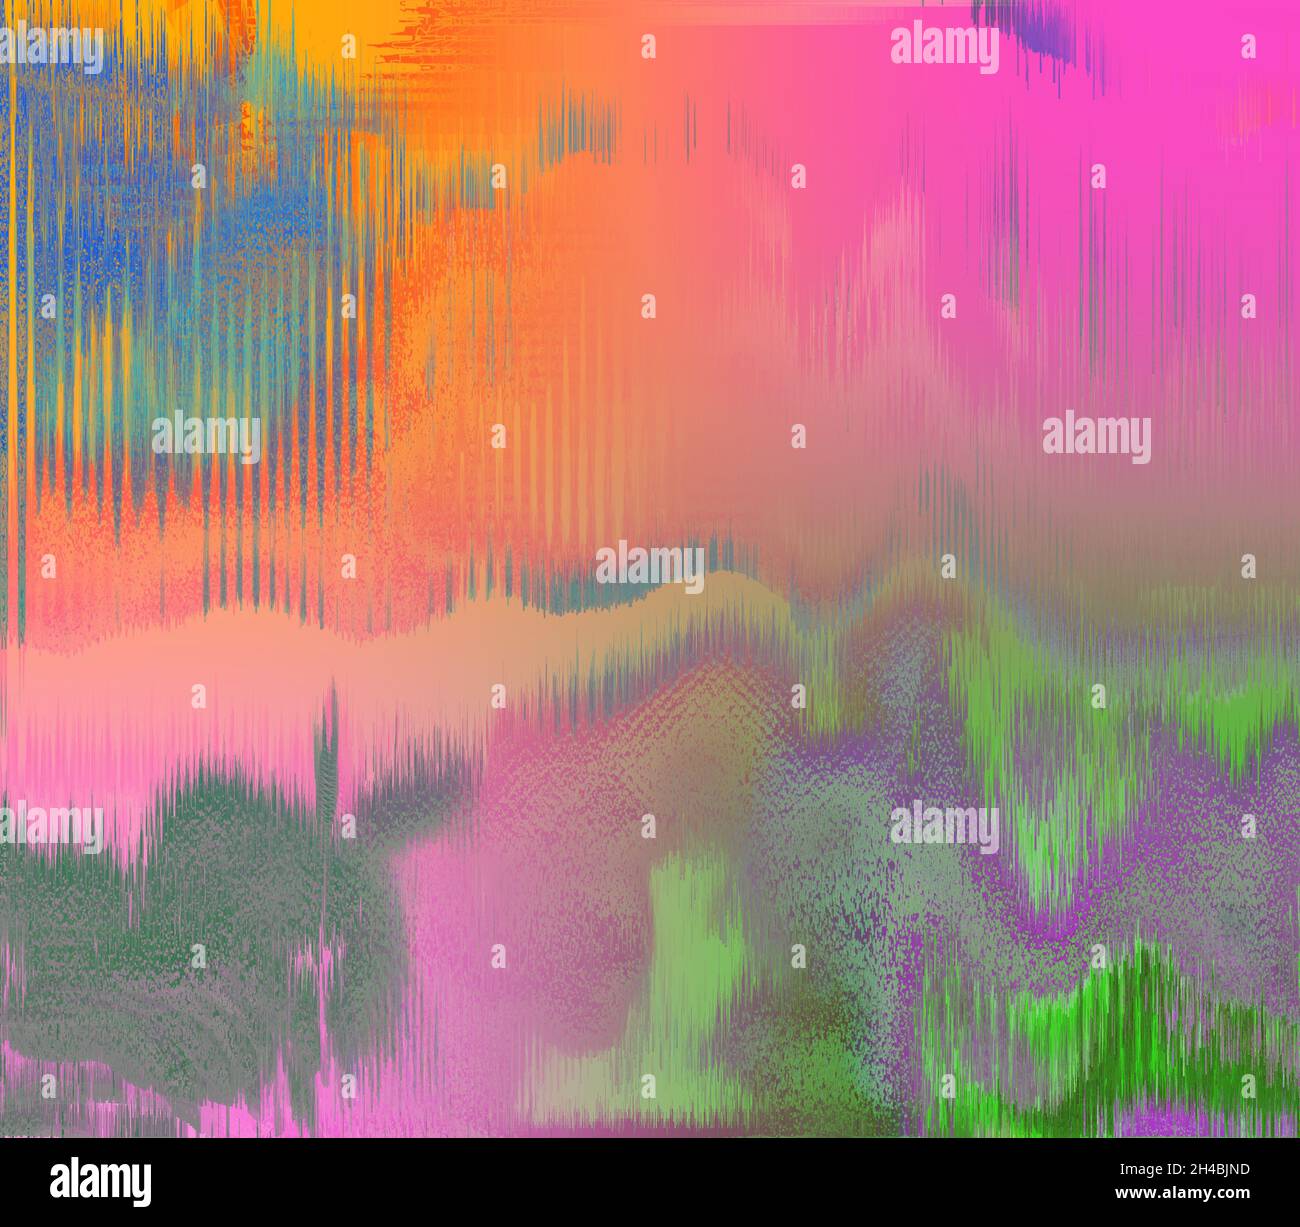 An abstract iridescent glitch art background image. Stock Photo